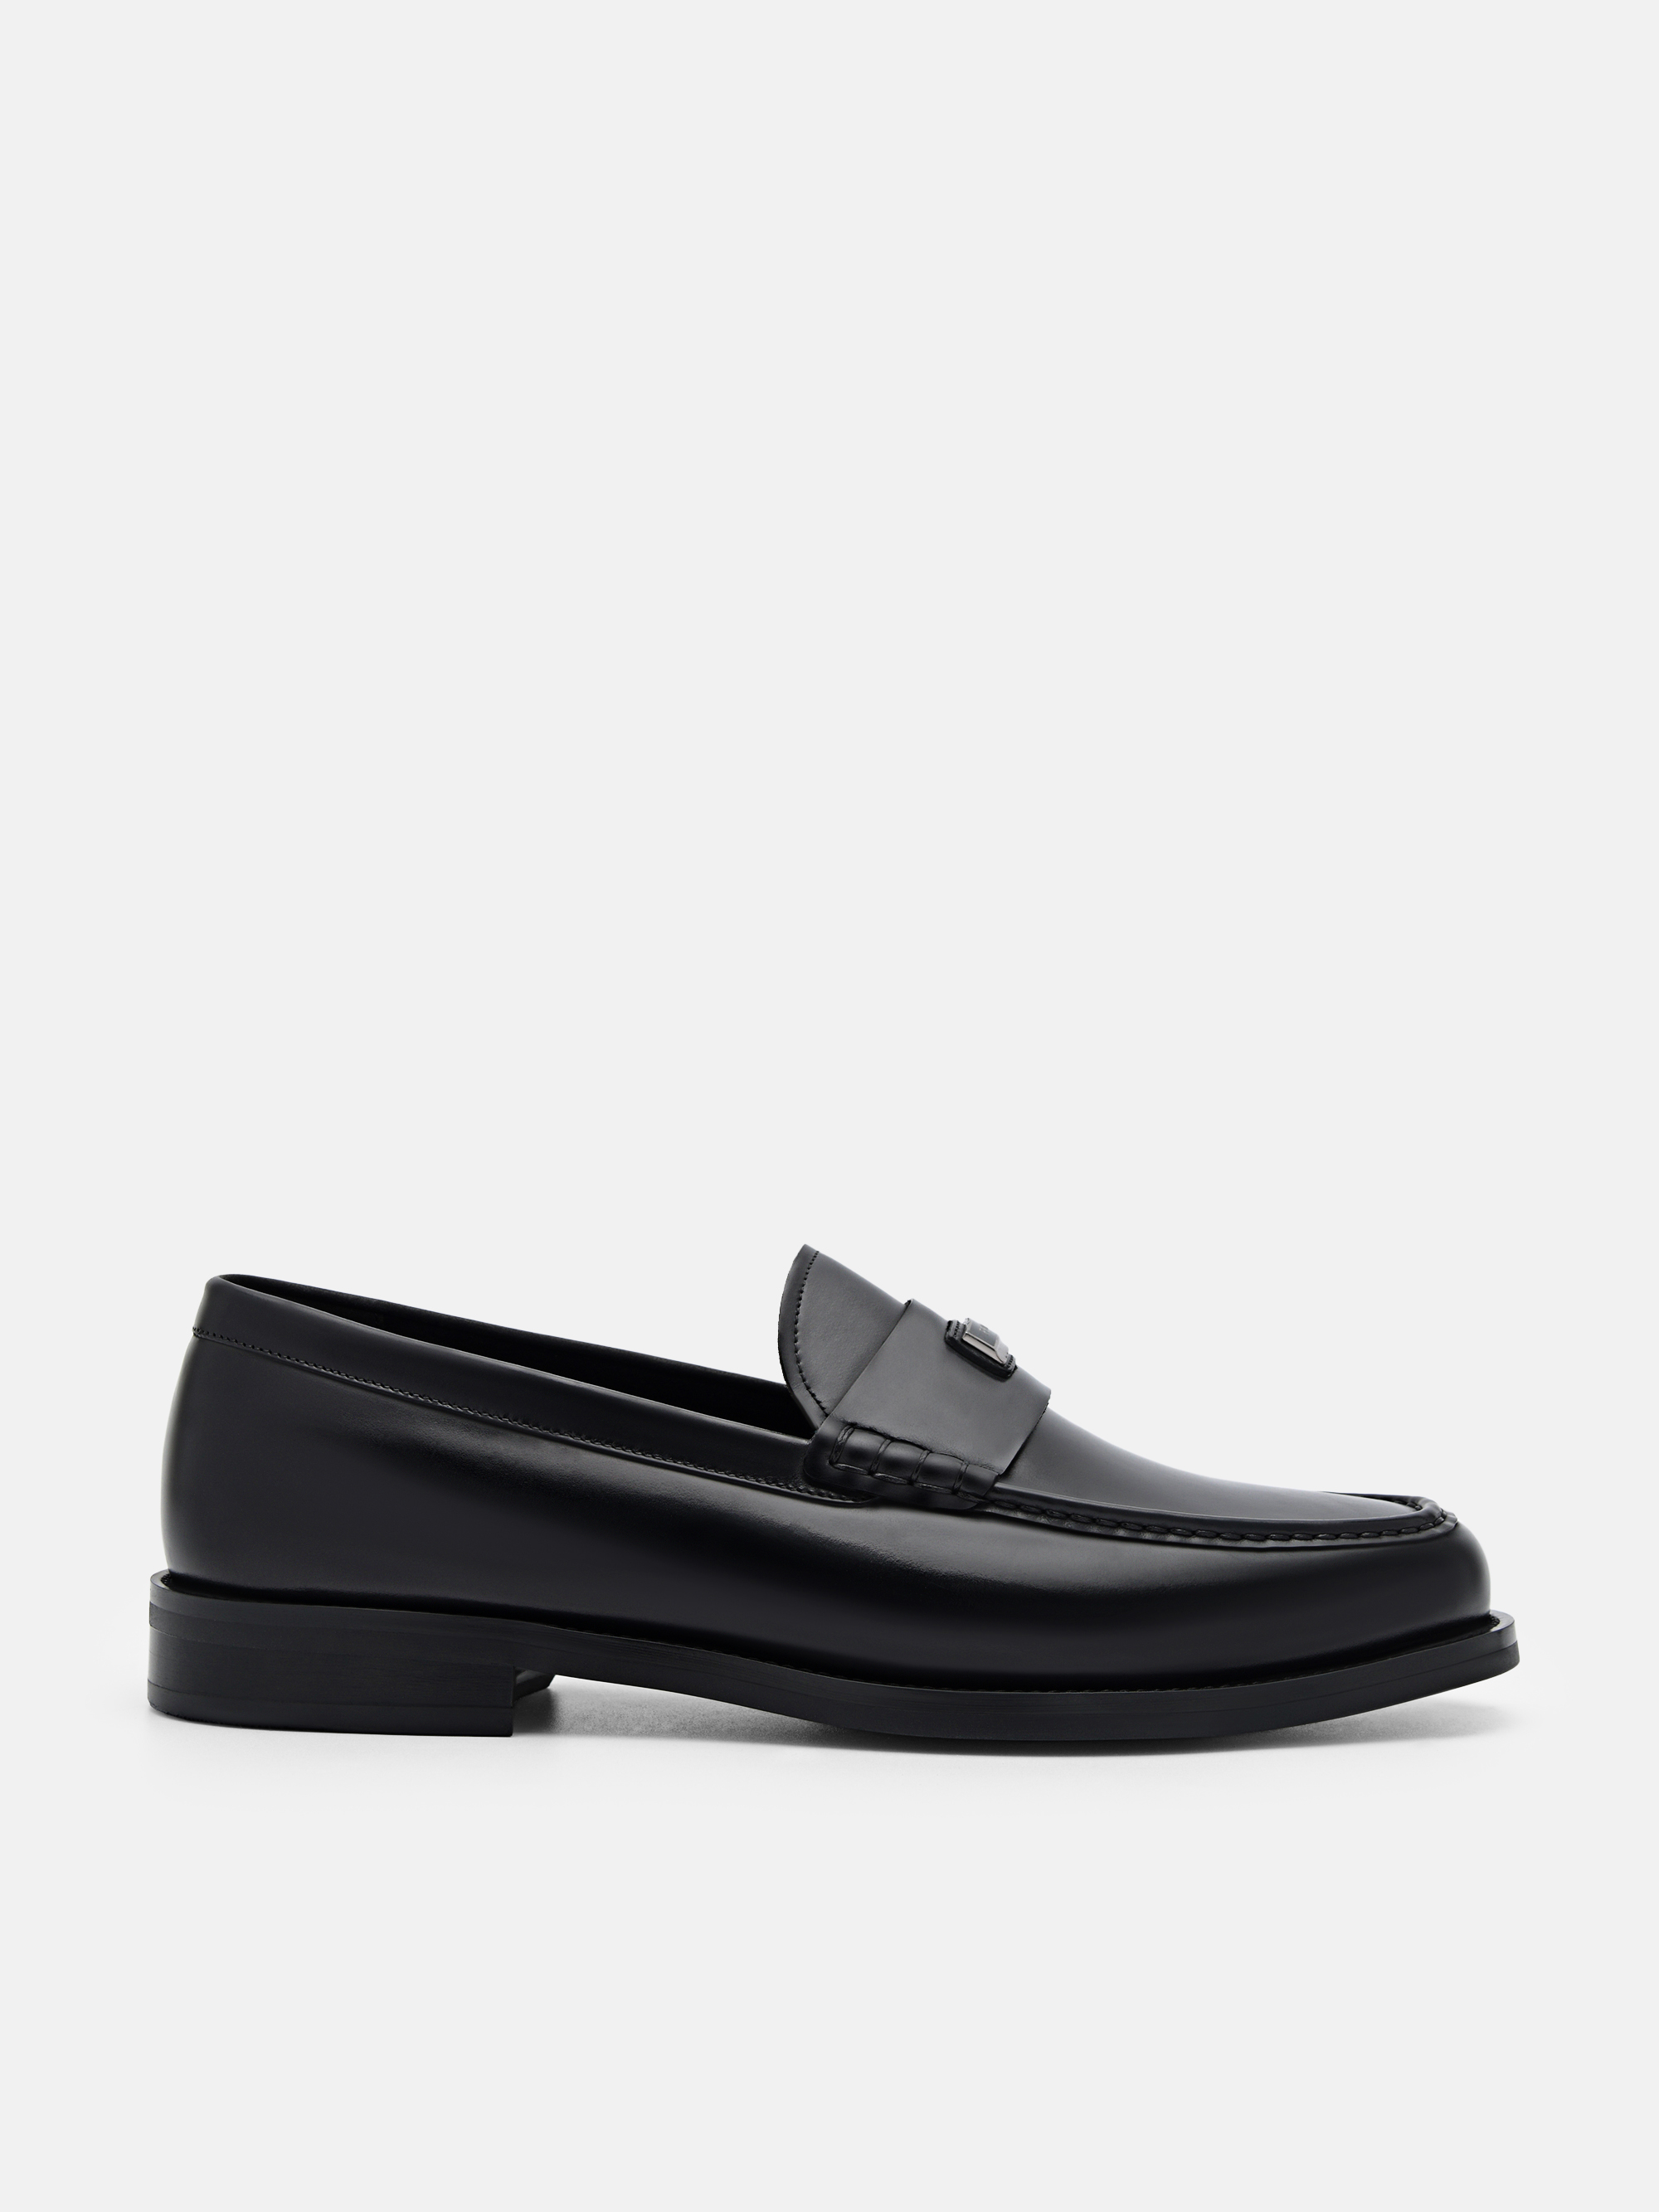 Black Leather Loafers - PEDRO US